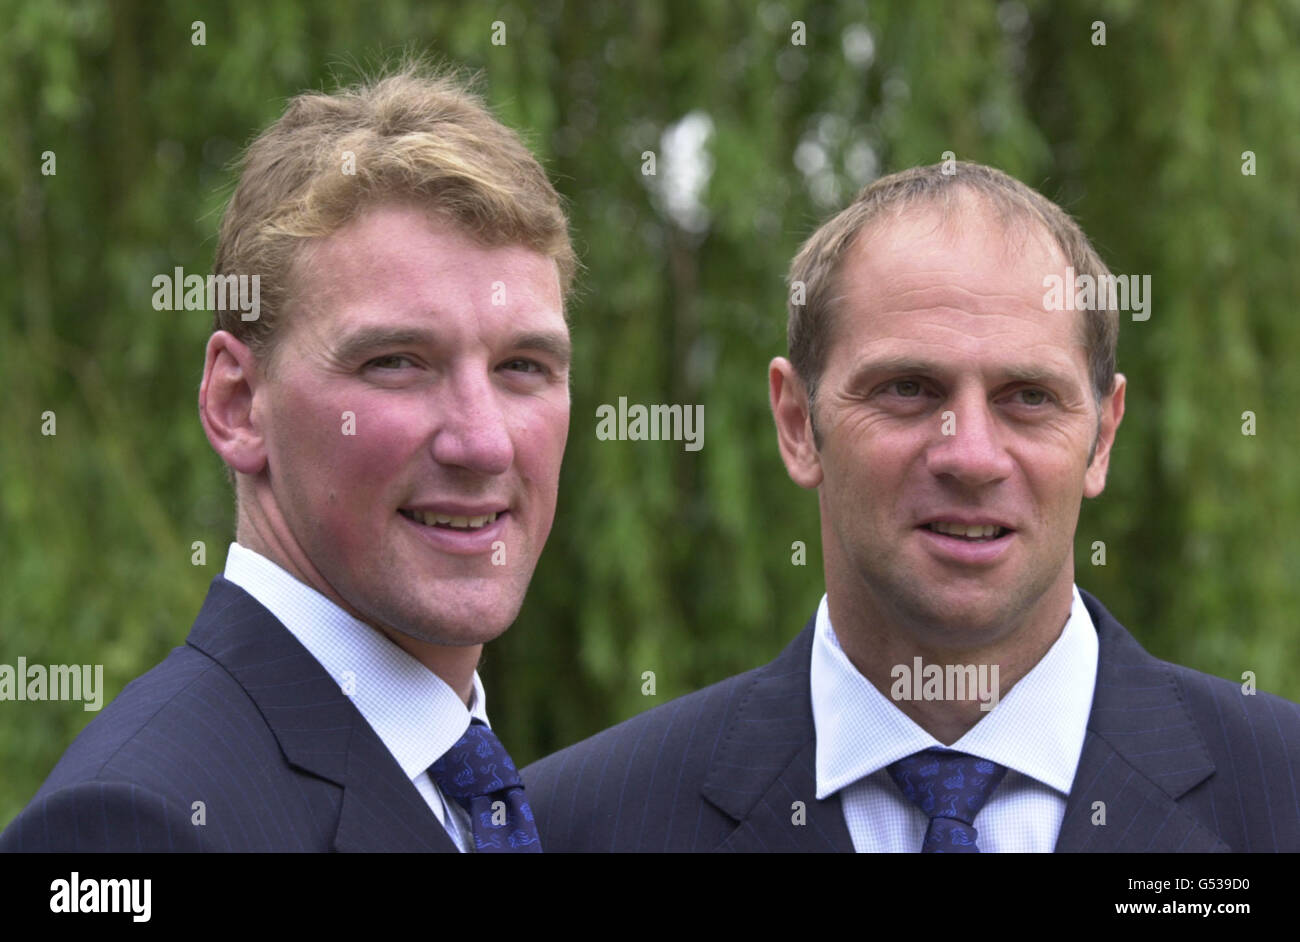 Olympic rowers Pincent & Redgrave. British Olympic Rowers of the Coxless Four's team, Left -Right Matthew Pinsent,& Steven Redgrave. Stock Photo